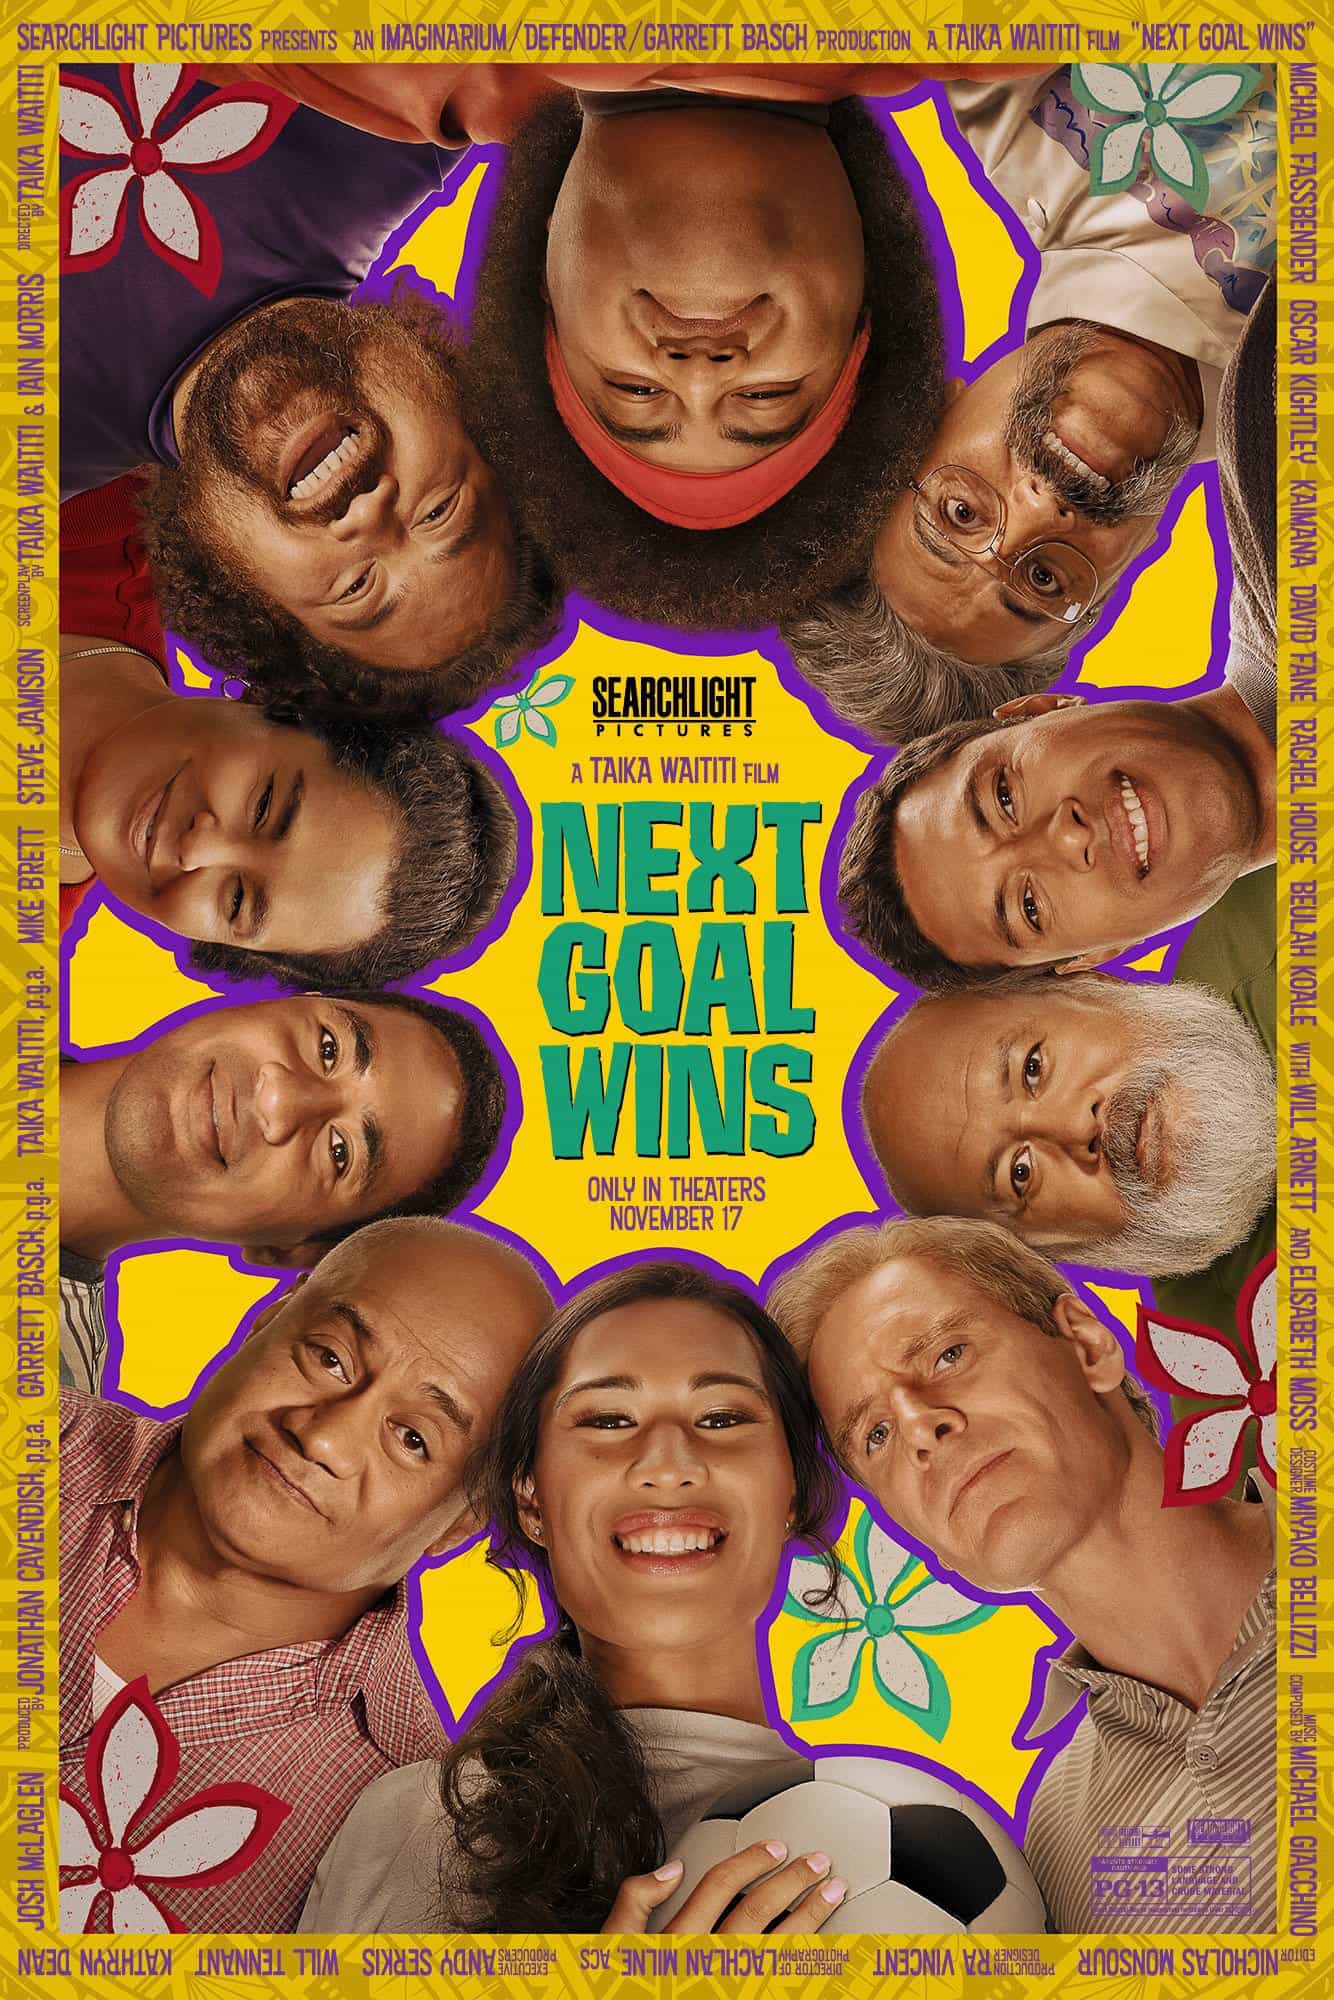 New poster has been released for Next Goal Wins which stars Elisabeth Moss and Michael Fassbender - movie UK release date 22nd September 2023 #nextgoalwins